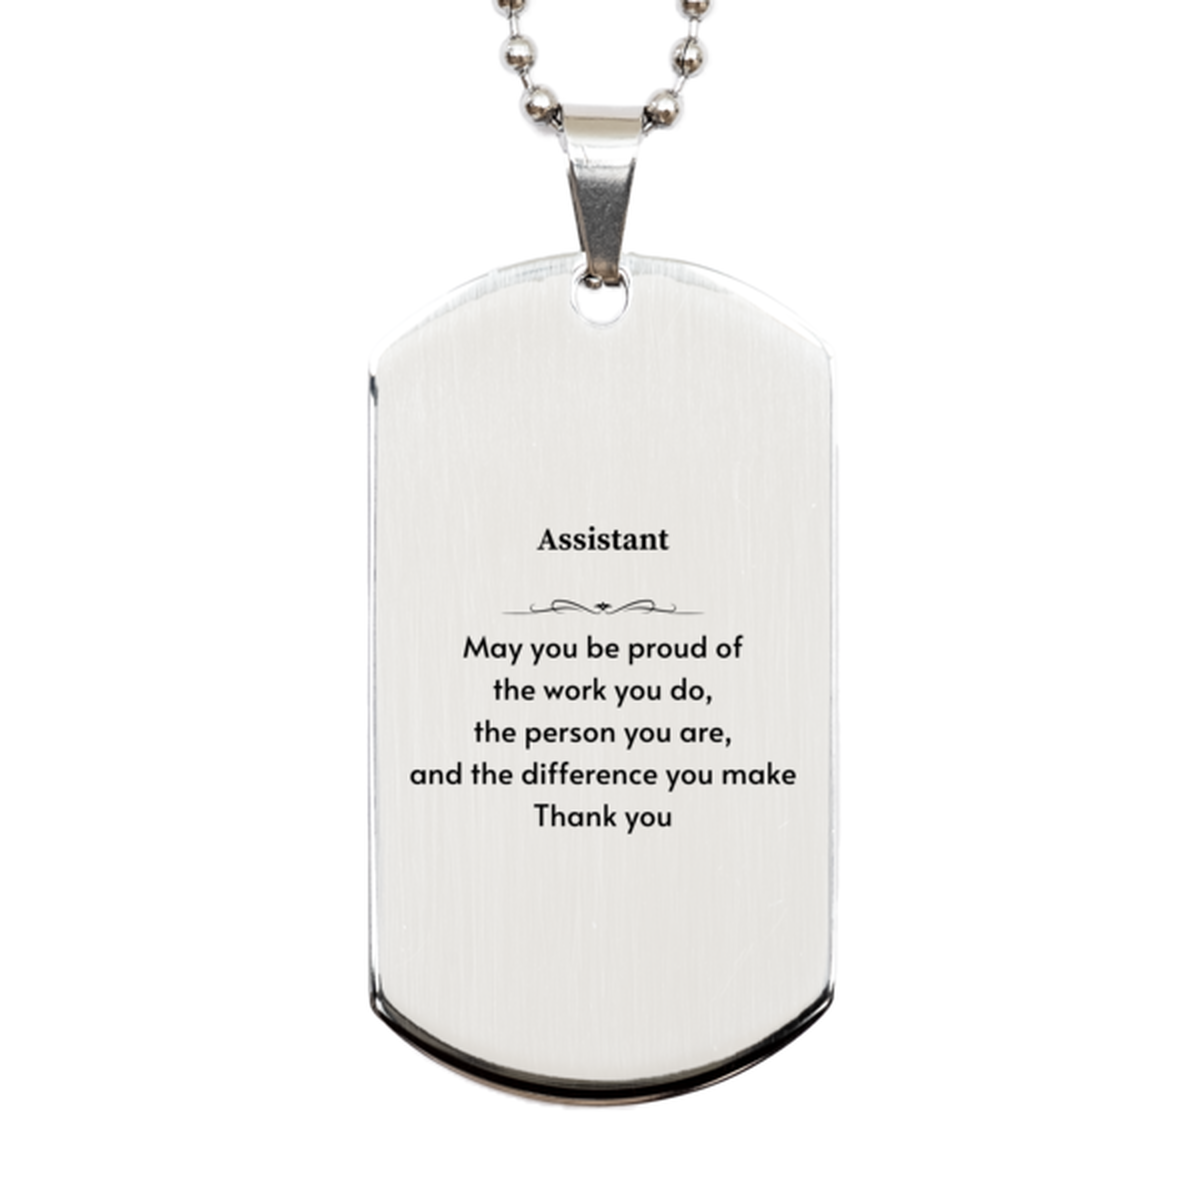 Heartwarming Silver Dog Tag Retirement Coworkers Gifts for Assistant, Assistant May You be proud of the work you do, the person you are Gifts for Boss Men Women Friends